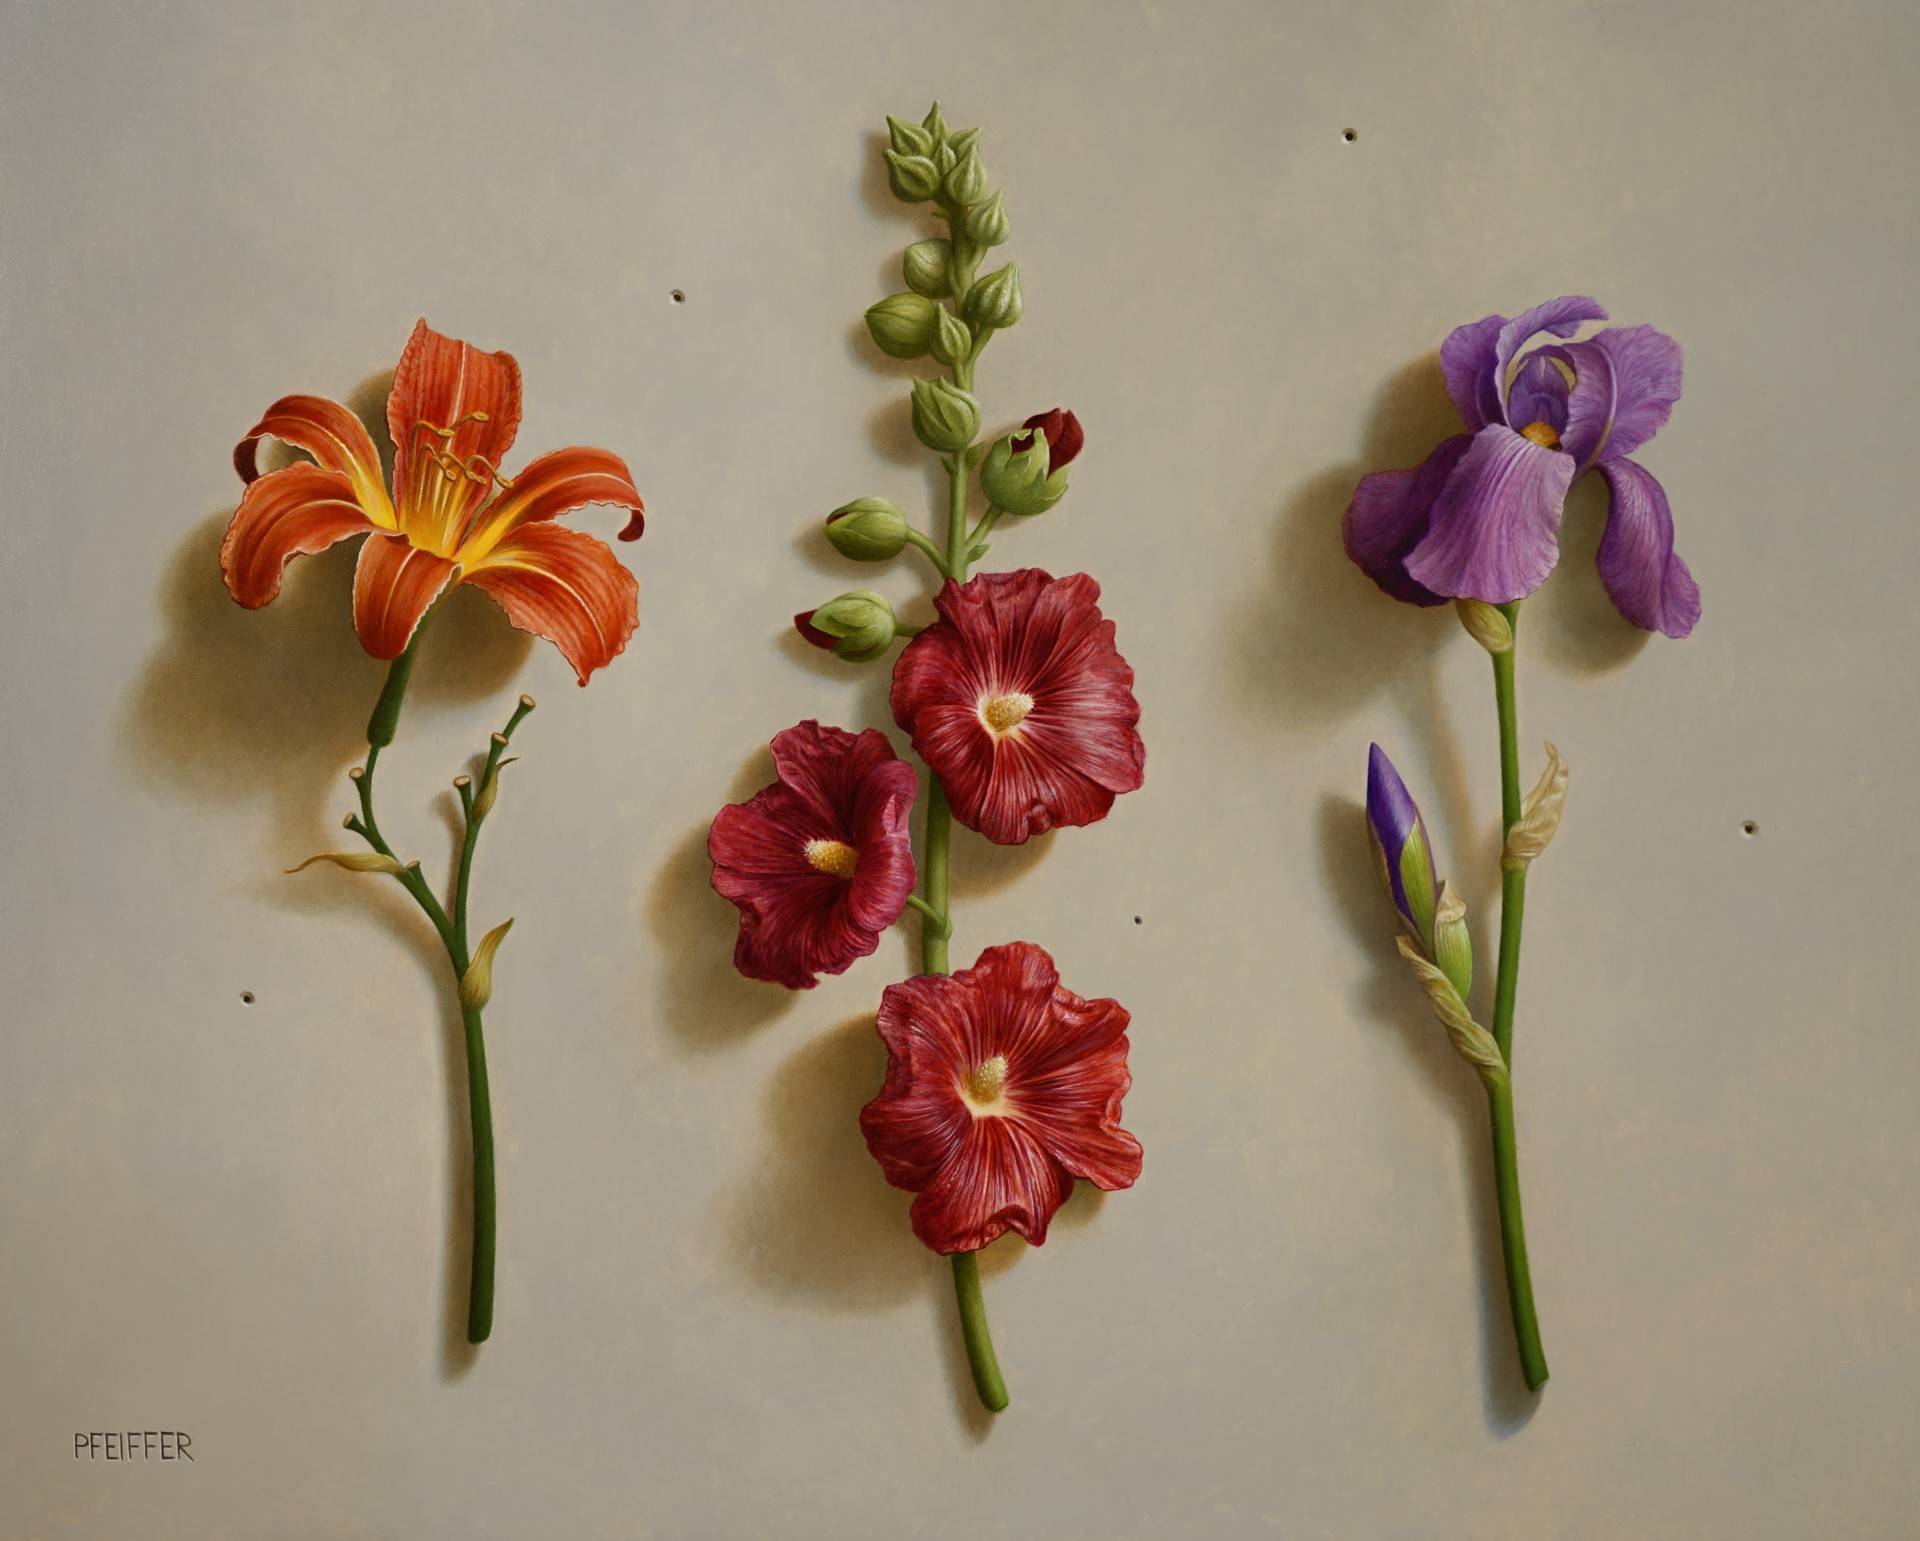 Wallflowers, Mixed Bouquet by Jacob A. Pfeiffer